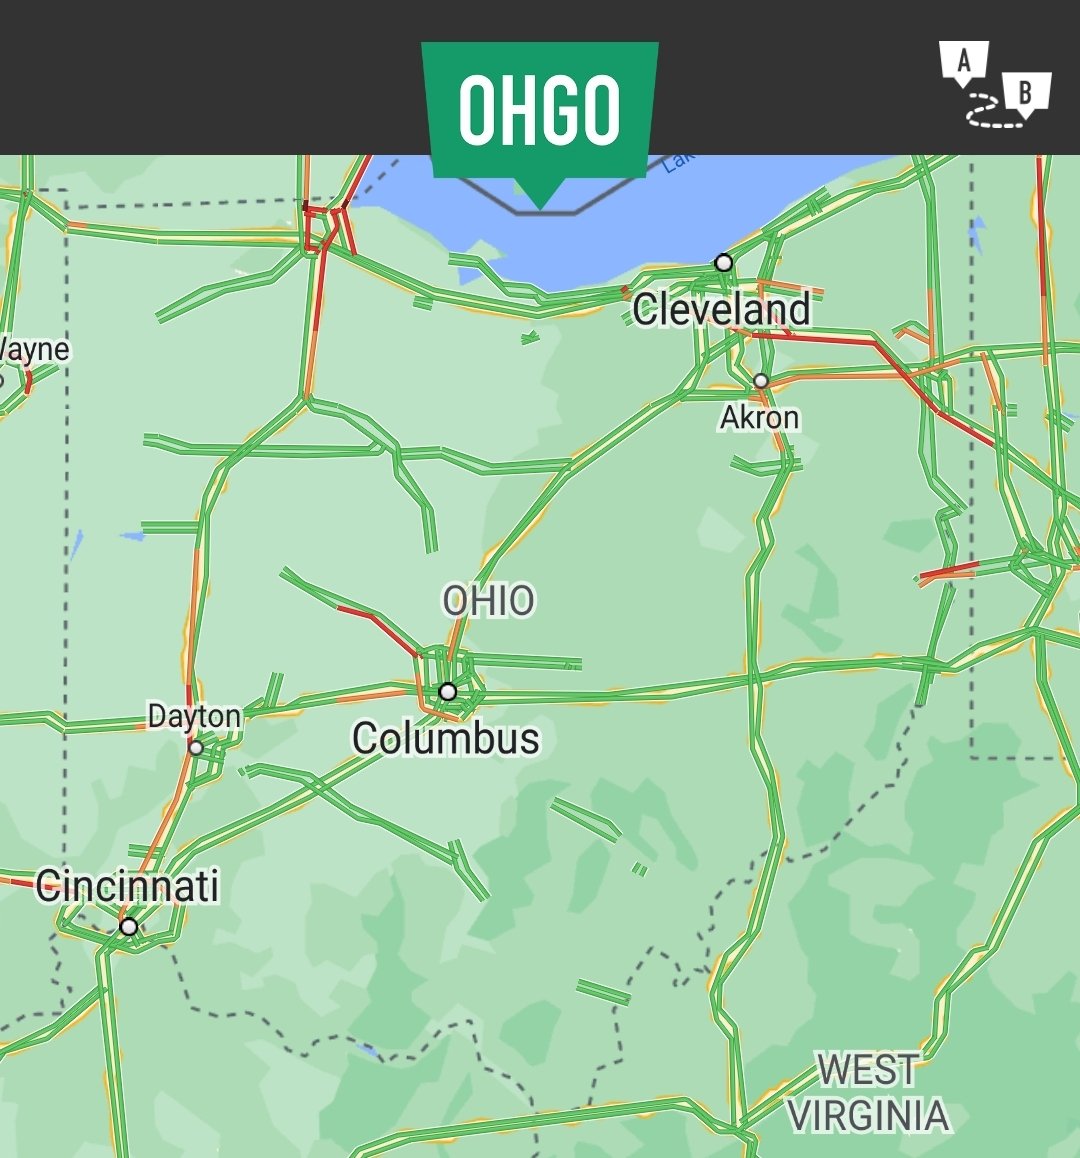 5PM: Heavy traffic exiting Ohio to Michigan and Pennsylvania. Heavy traffic returning to Ohio on I-74 near Cincinnati and to Columbus on US 33 from Marysville. Also hearing of a nearly 5 milw backup on SR 31 in Hardin County near Mt. Victory. What are you seeing?